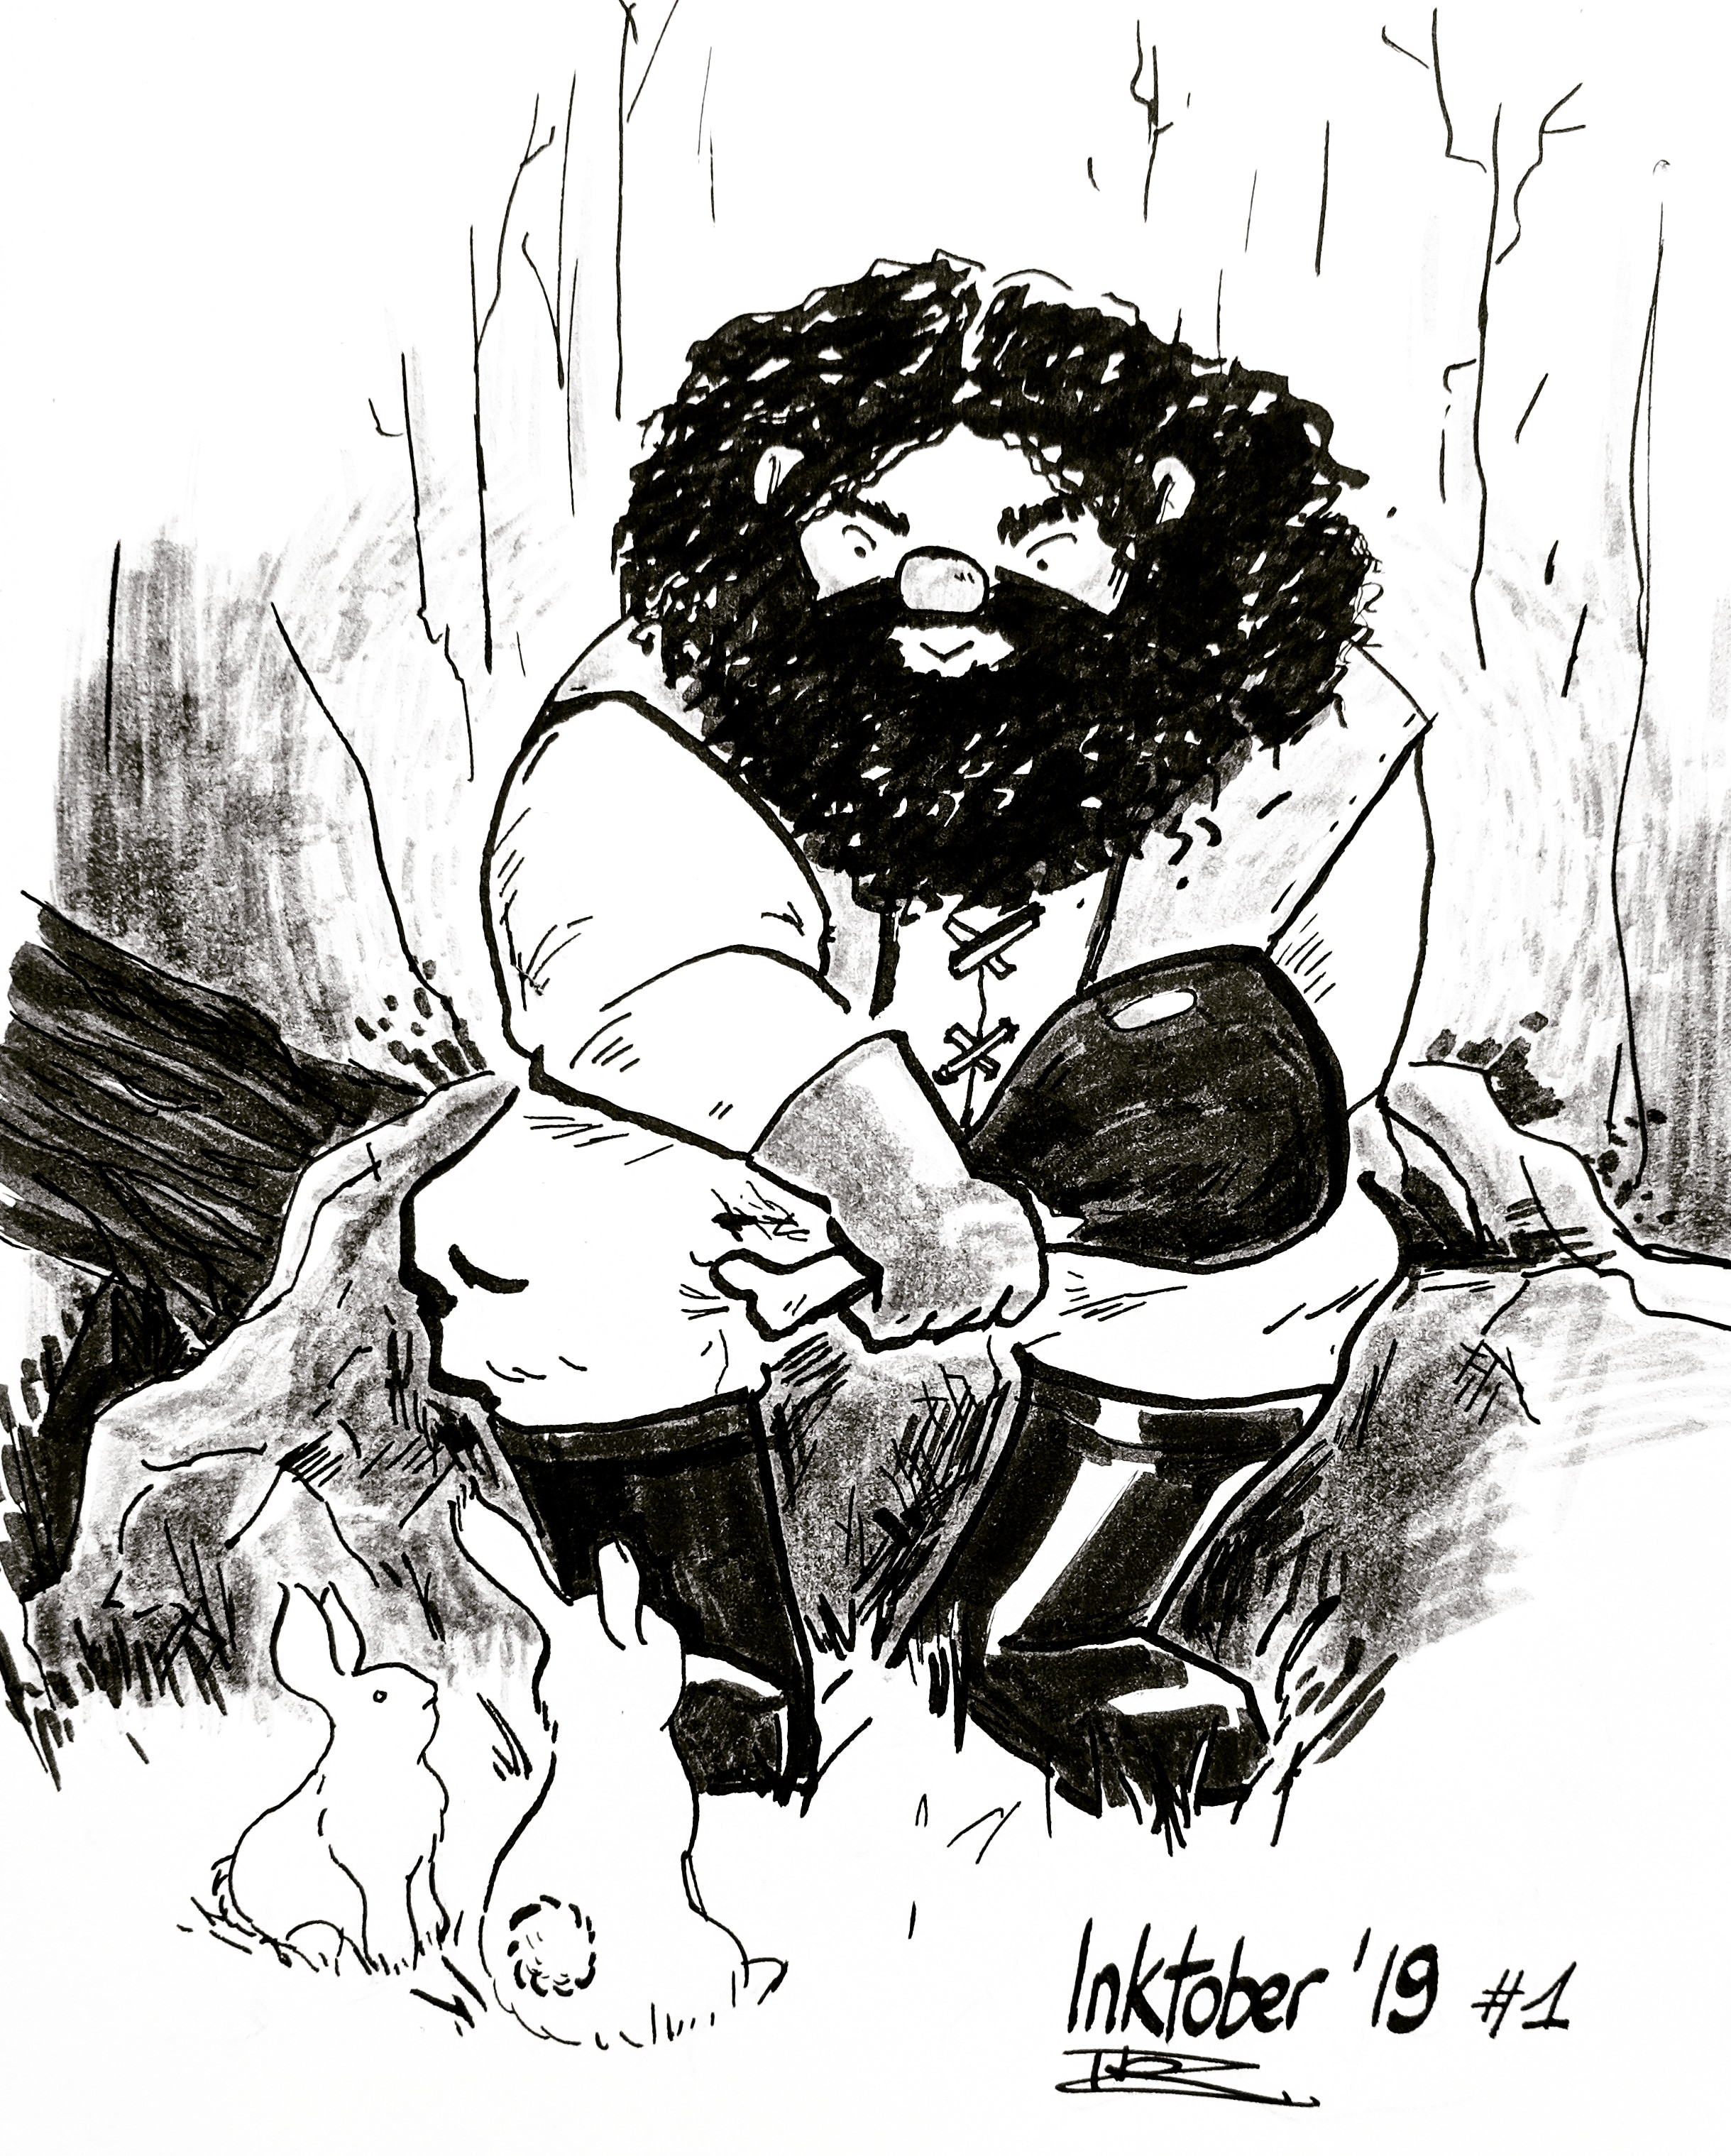 Little illustration of Hagrid having lunch in company of bunnies for Inktober 2019.